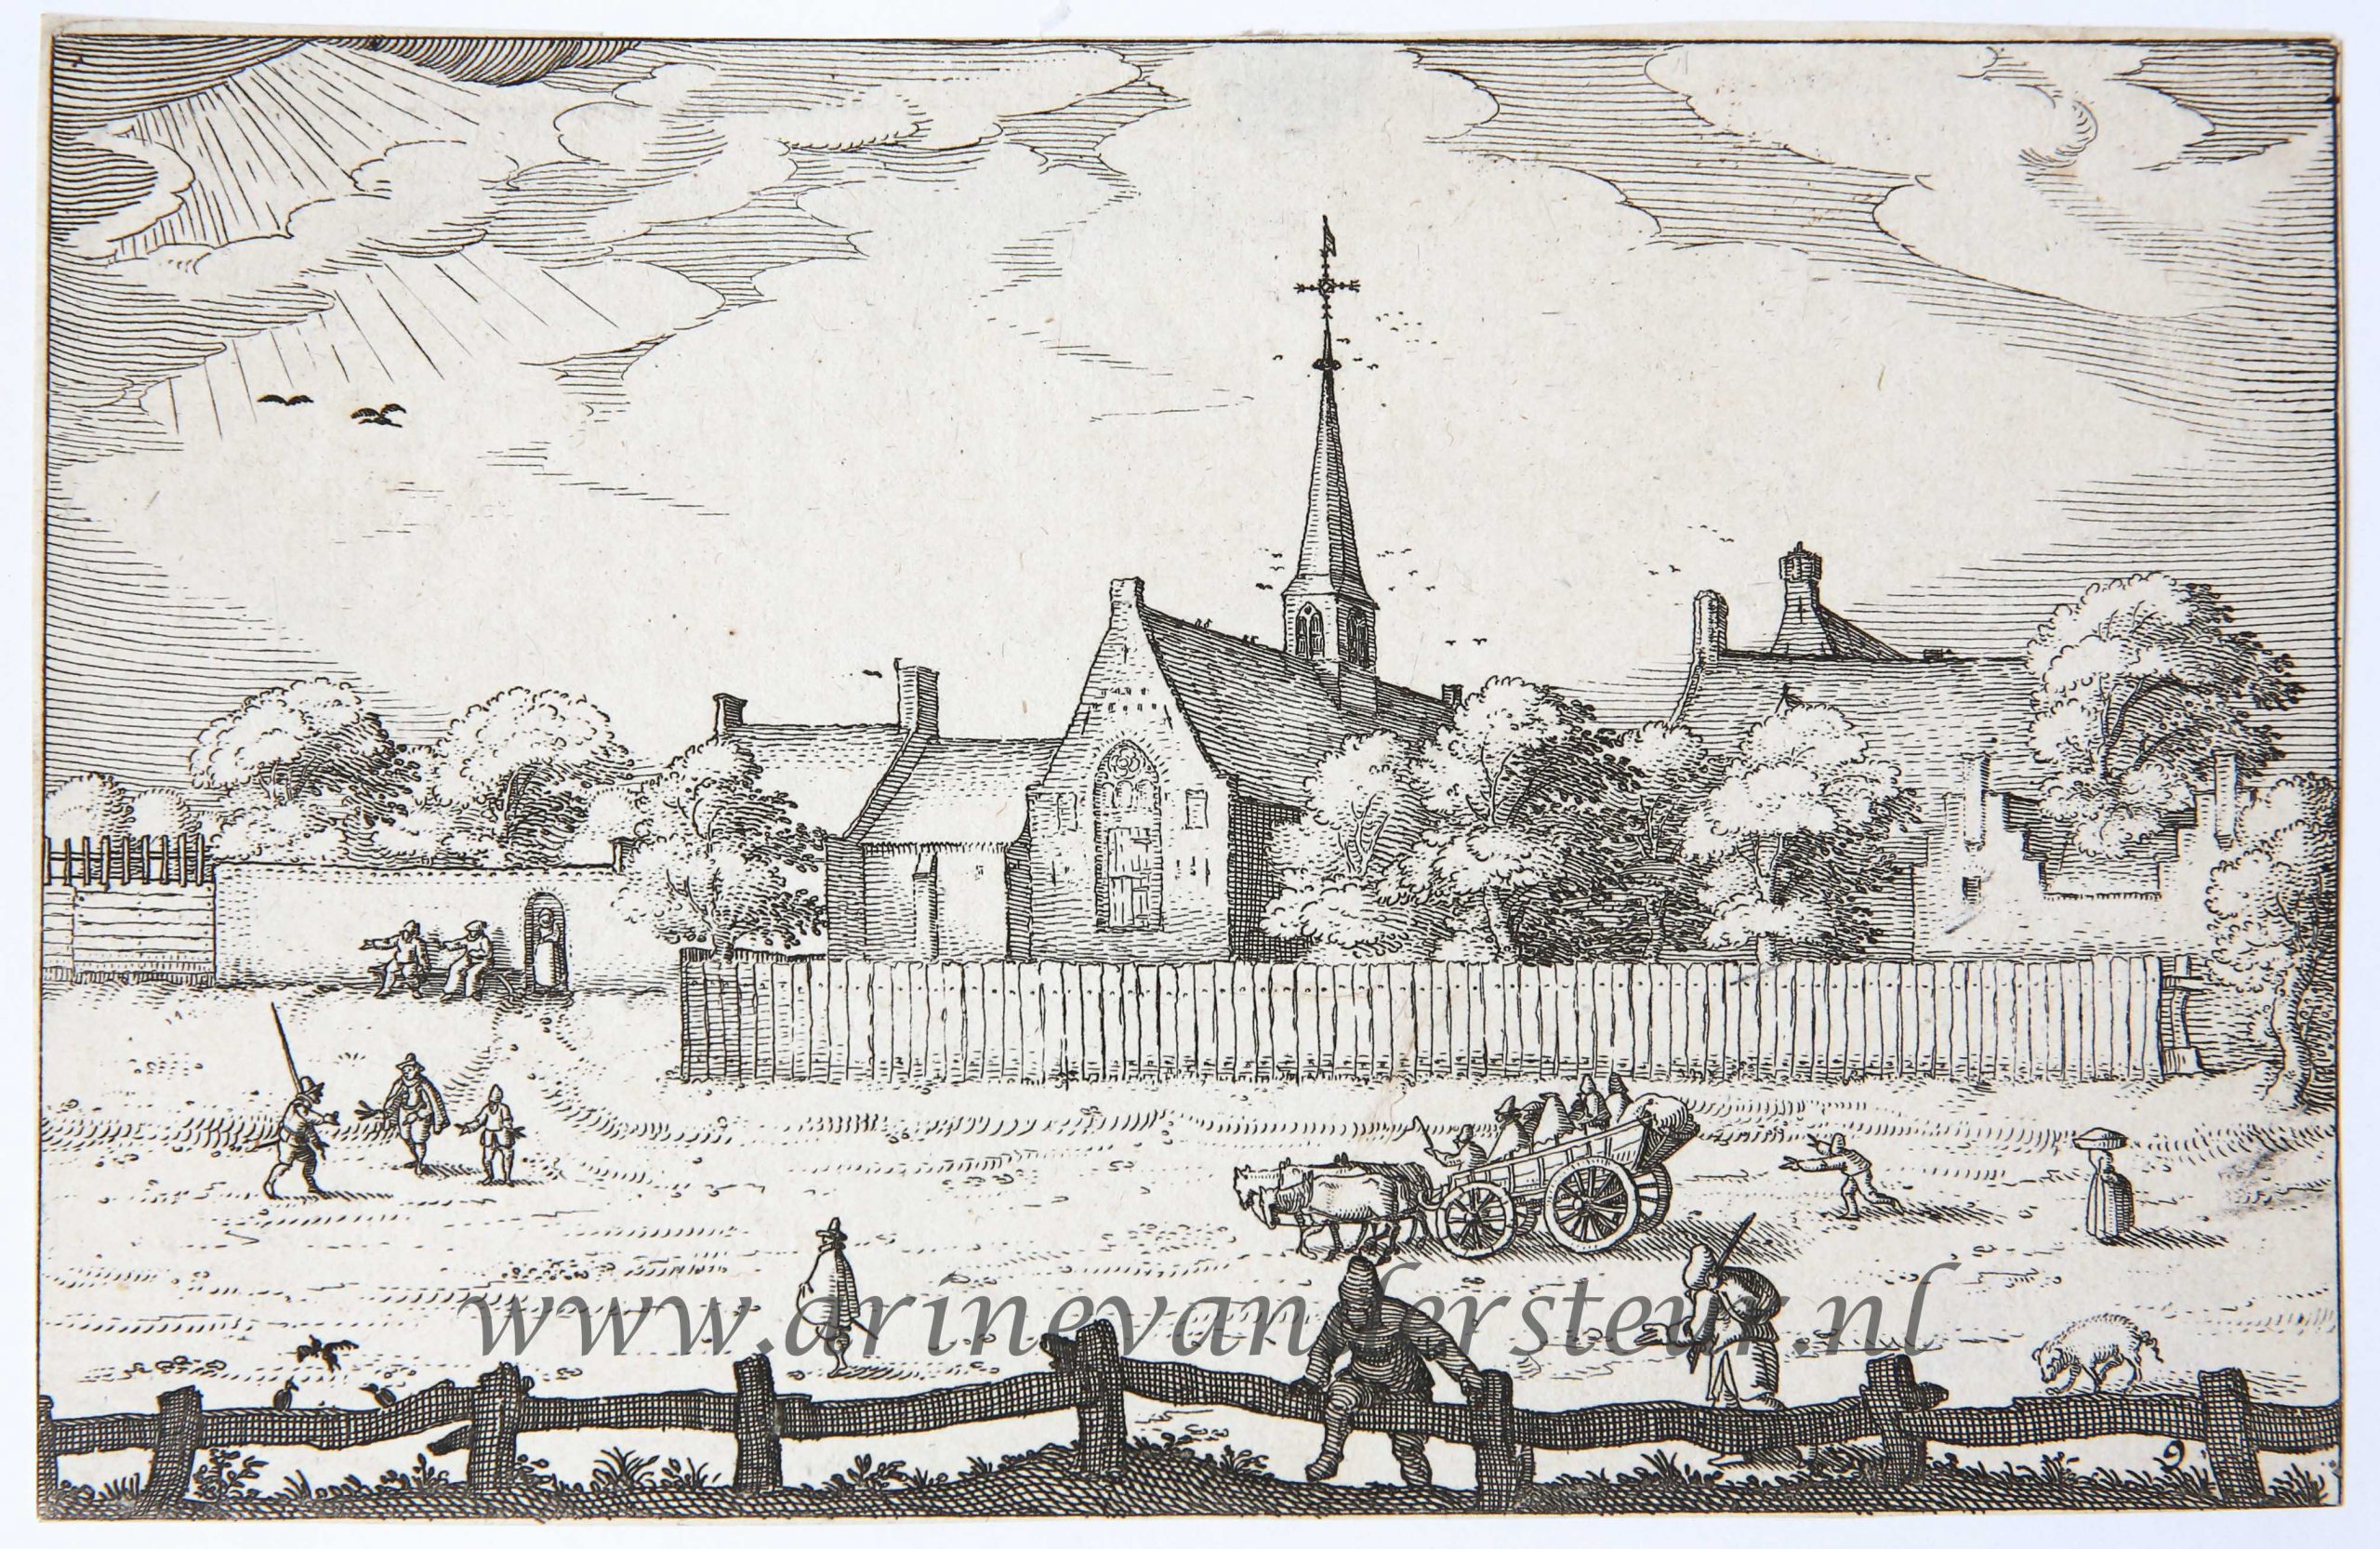 [Anique print, etching] The leper-house at Haarlem/De Leprozerie in Haarlem, published 1612.